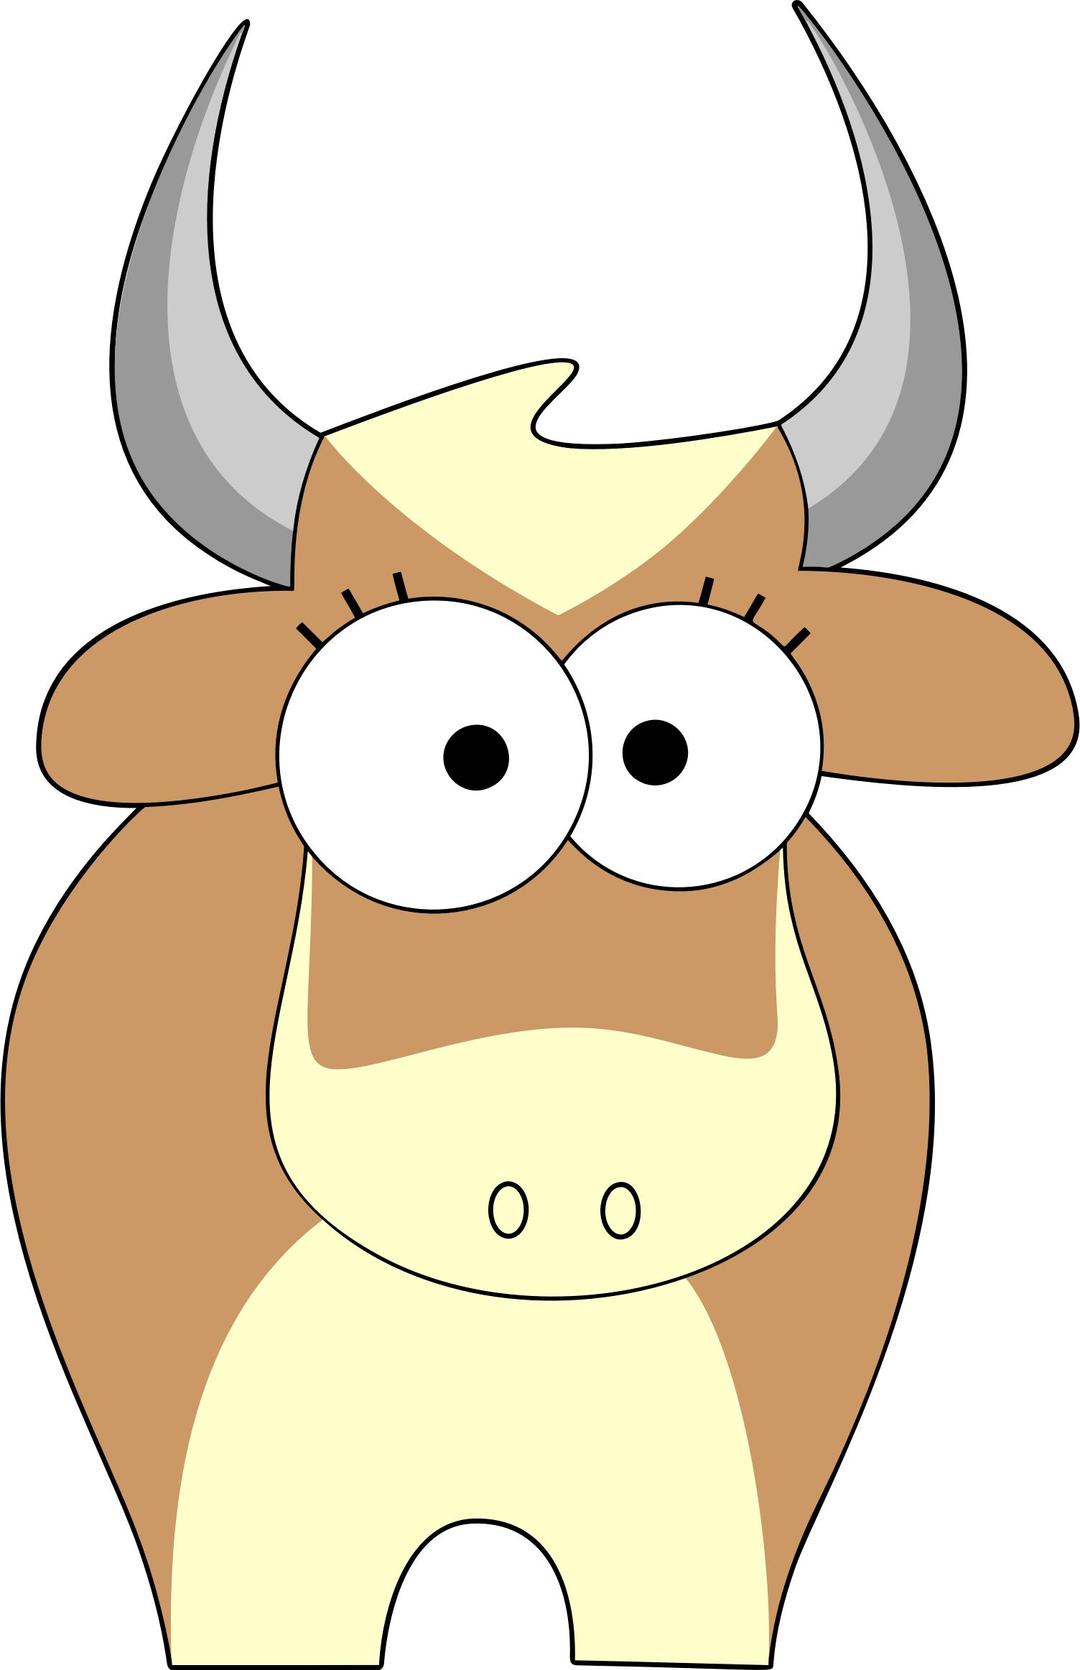 Comic Cow Character png transparent